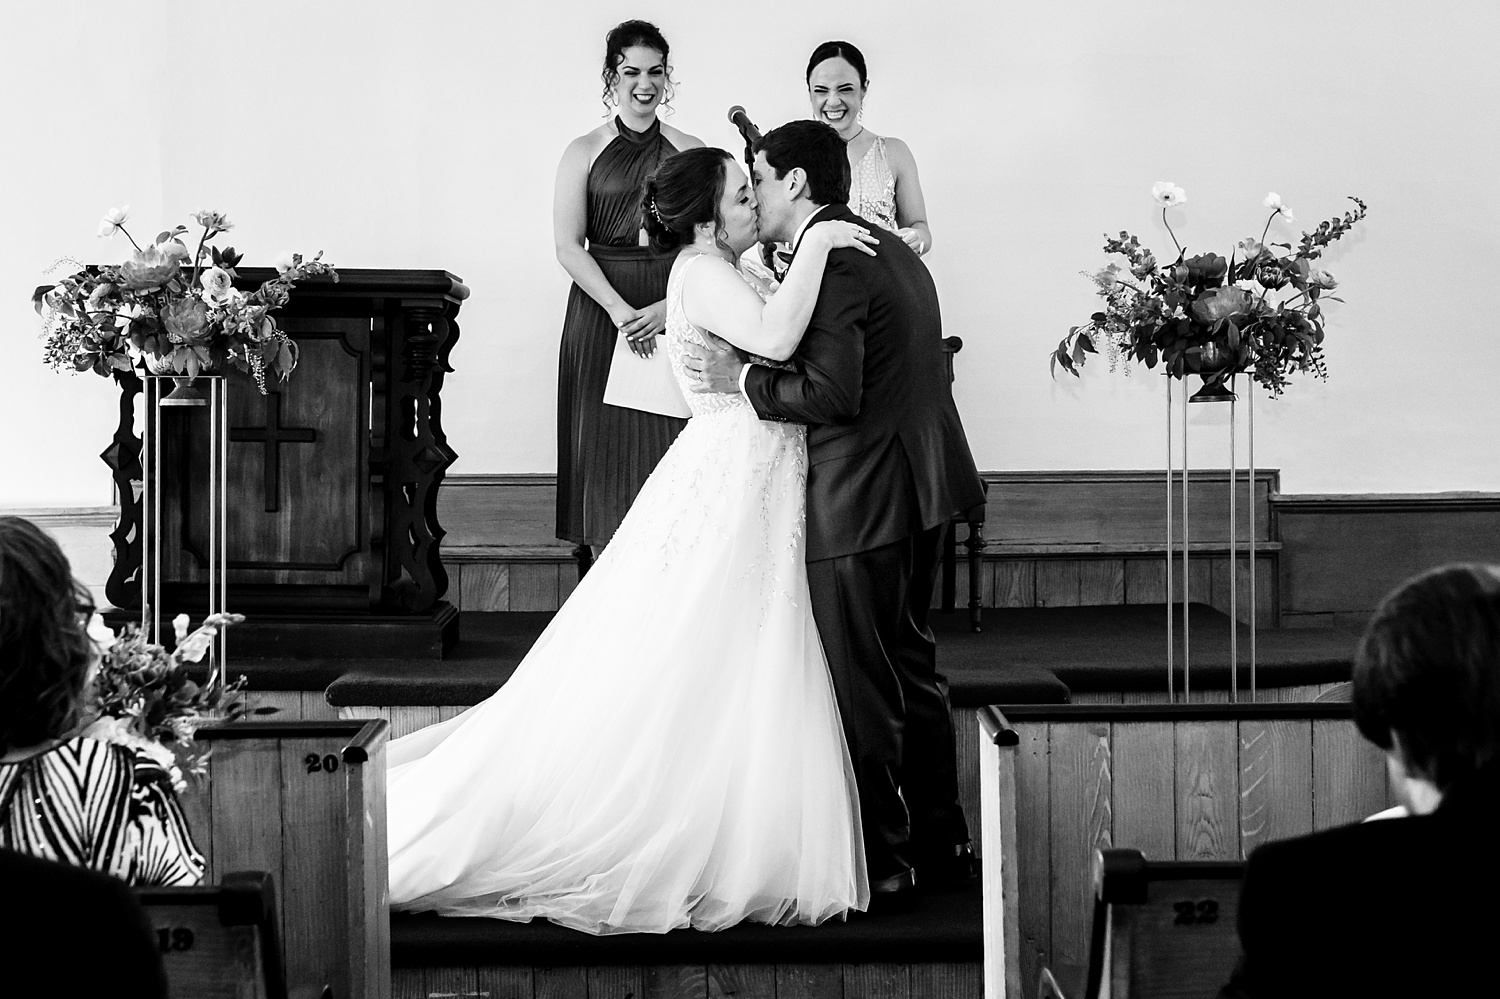 The first kiss of the bride and groom on their wedding day